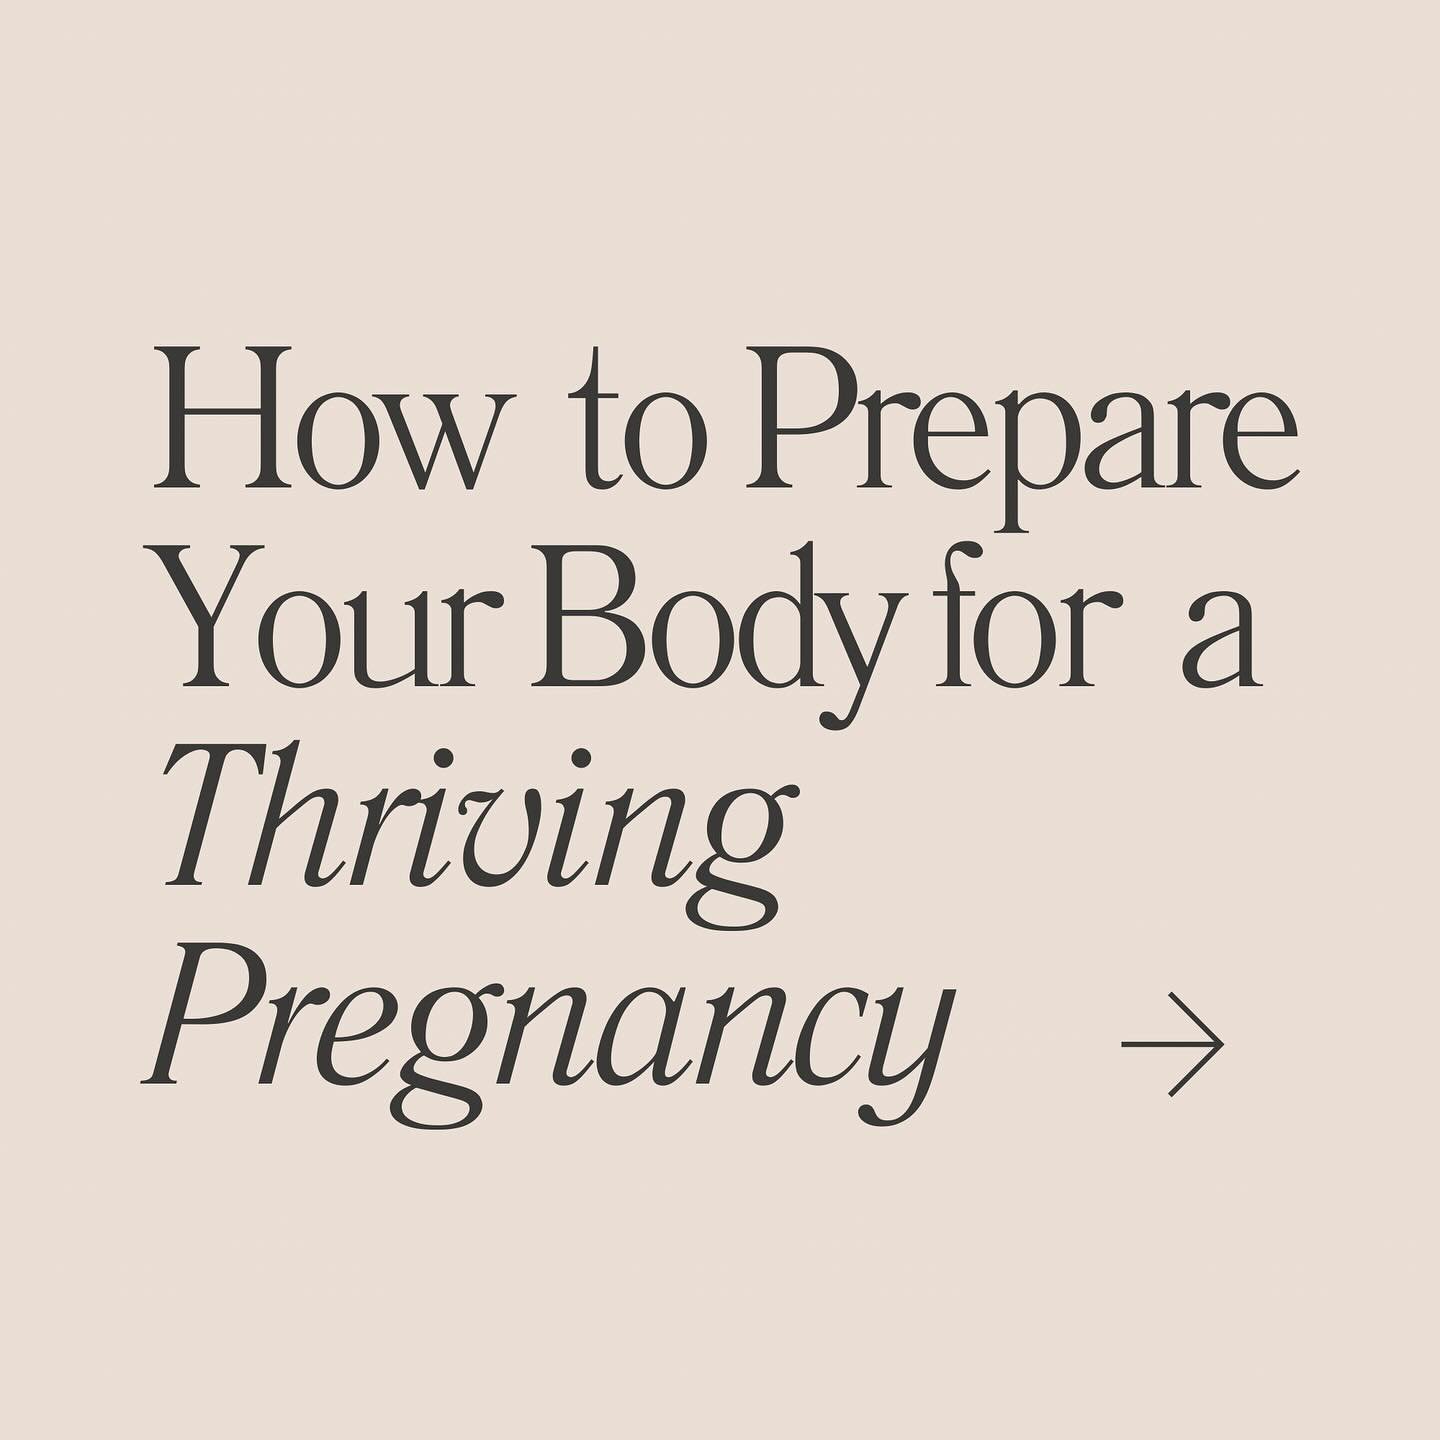 I attribute my (so far) smooth pregnancy to focusing on these four things:

1️⃣ Prioritizing nutrient density

2️⃣ Supporting digestion

3️⃣ Improving my resiliency to stress

4️⃣ Mineral balancing through HTMA testing

It&rsquo;s never too early (or